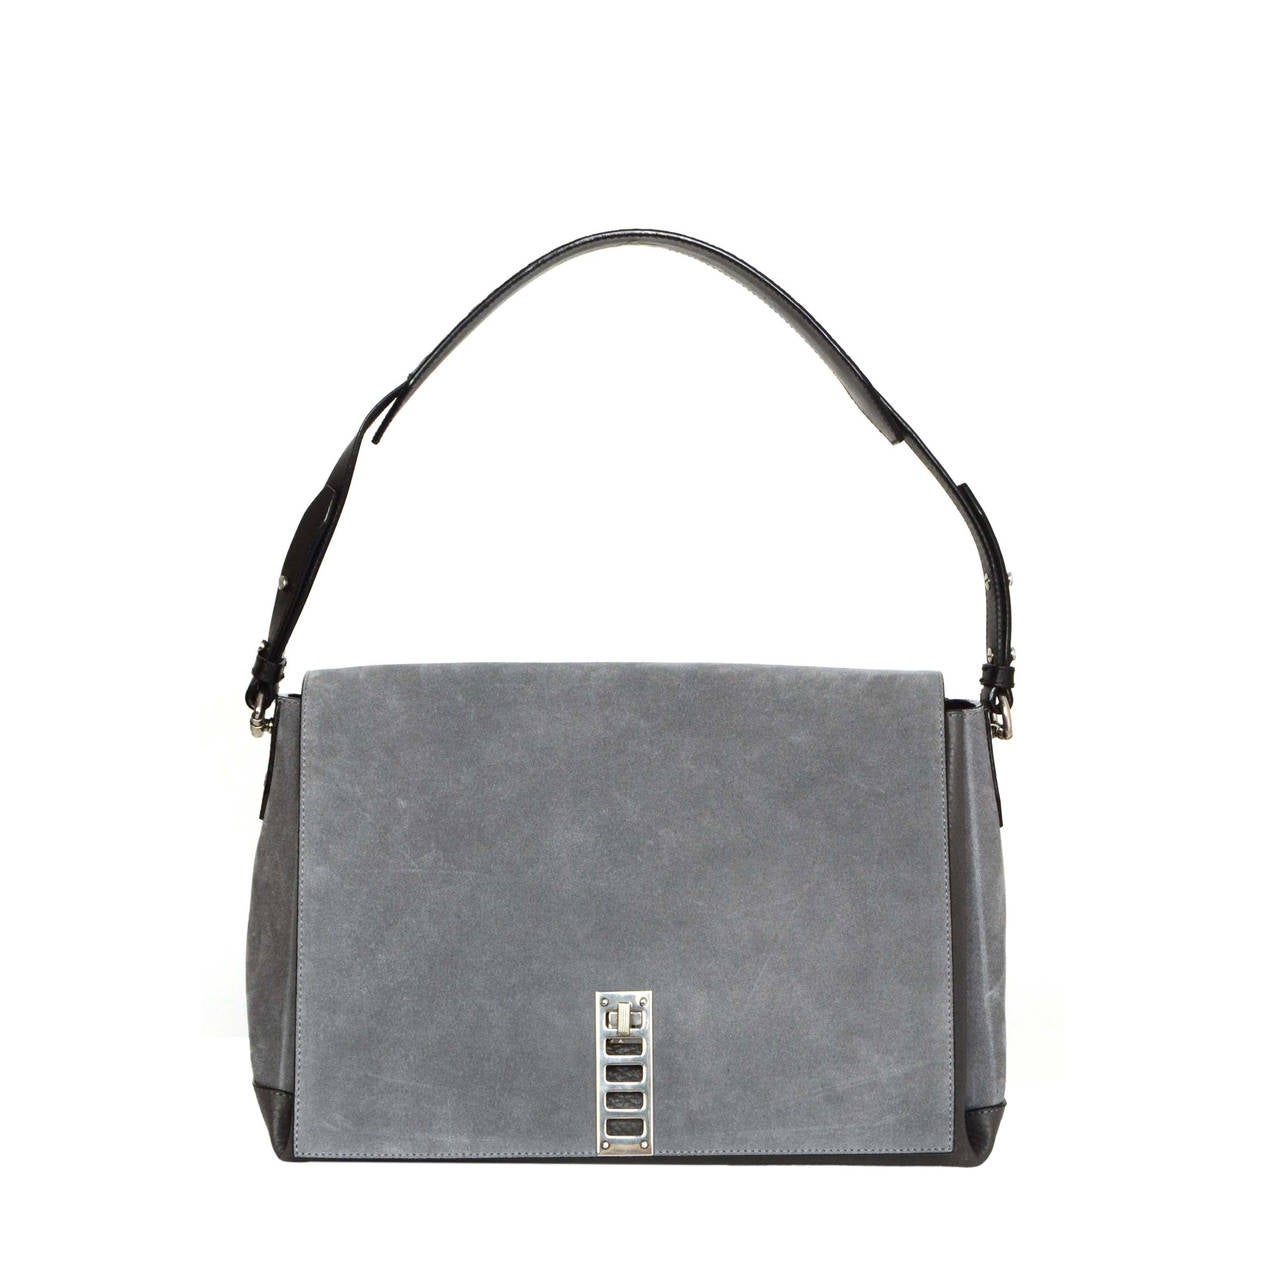 PROENZA SCHOULER Grey Leather and Suede 